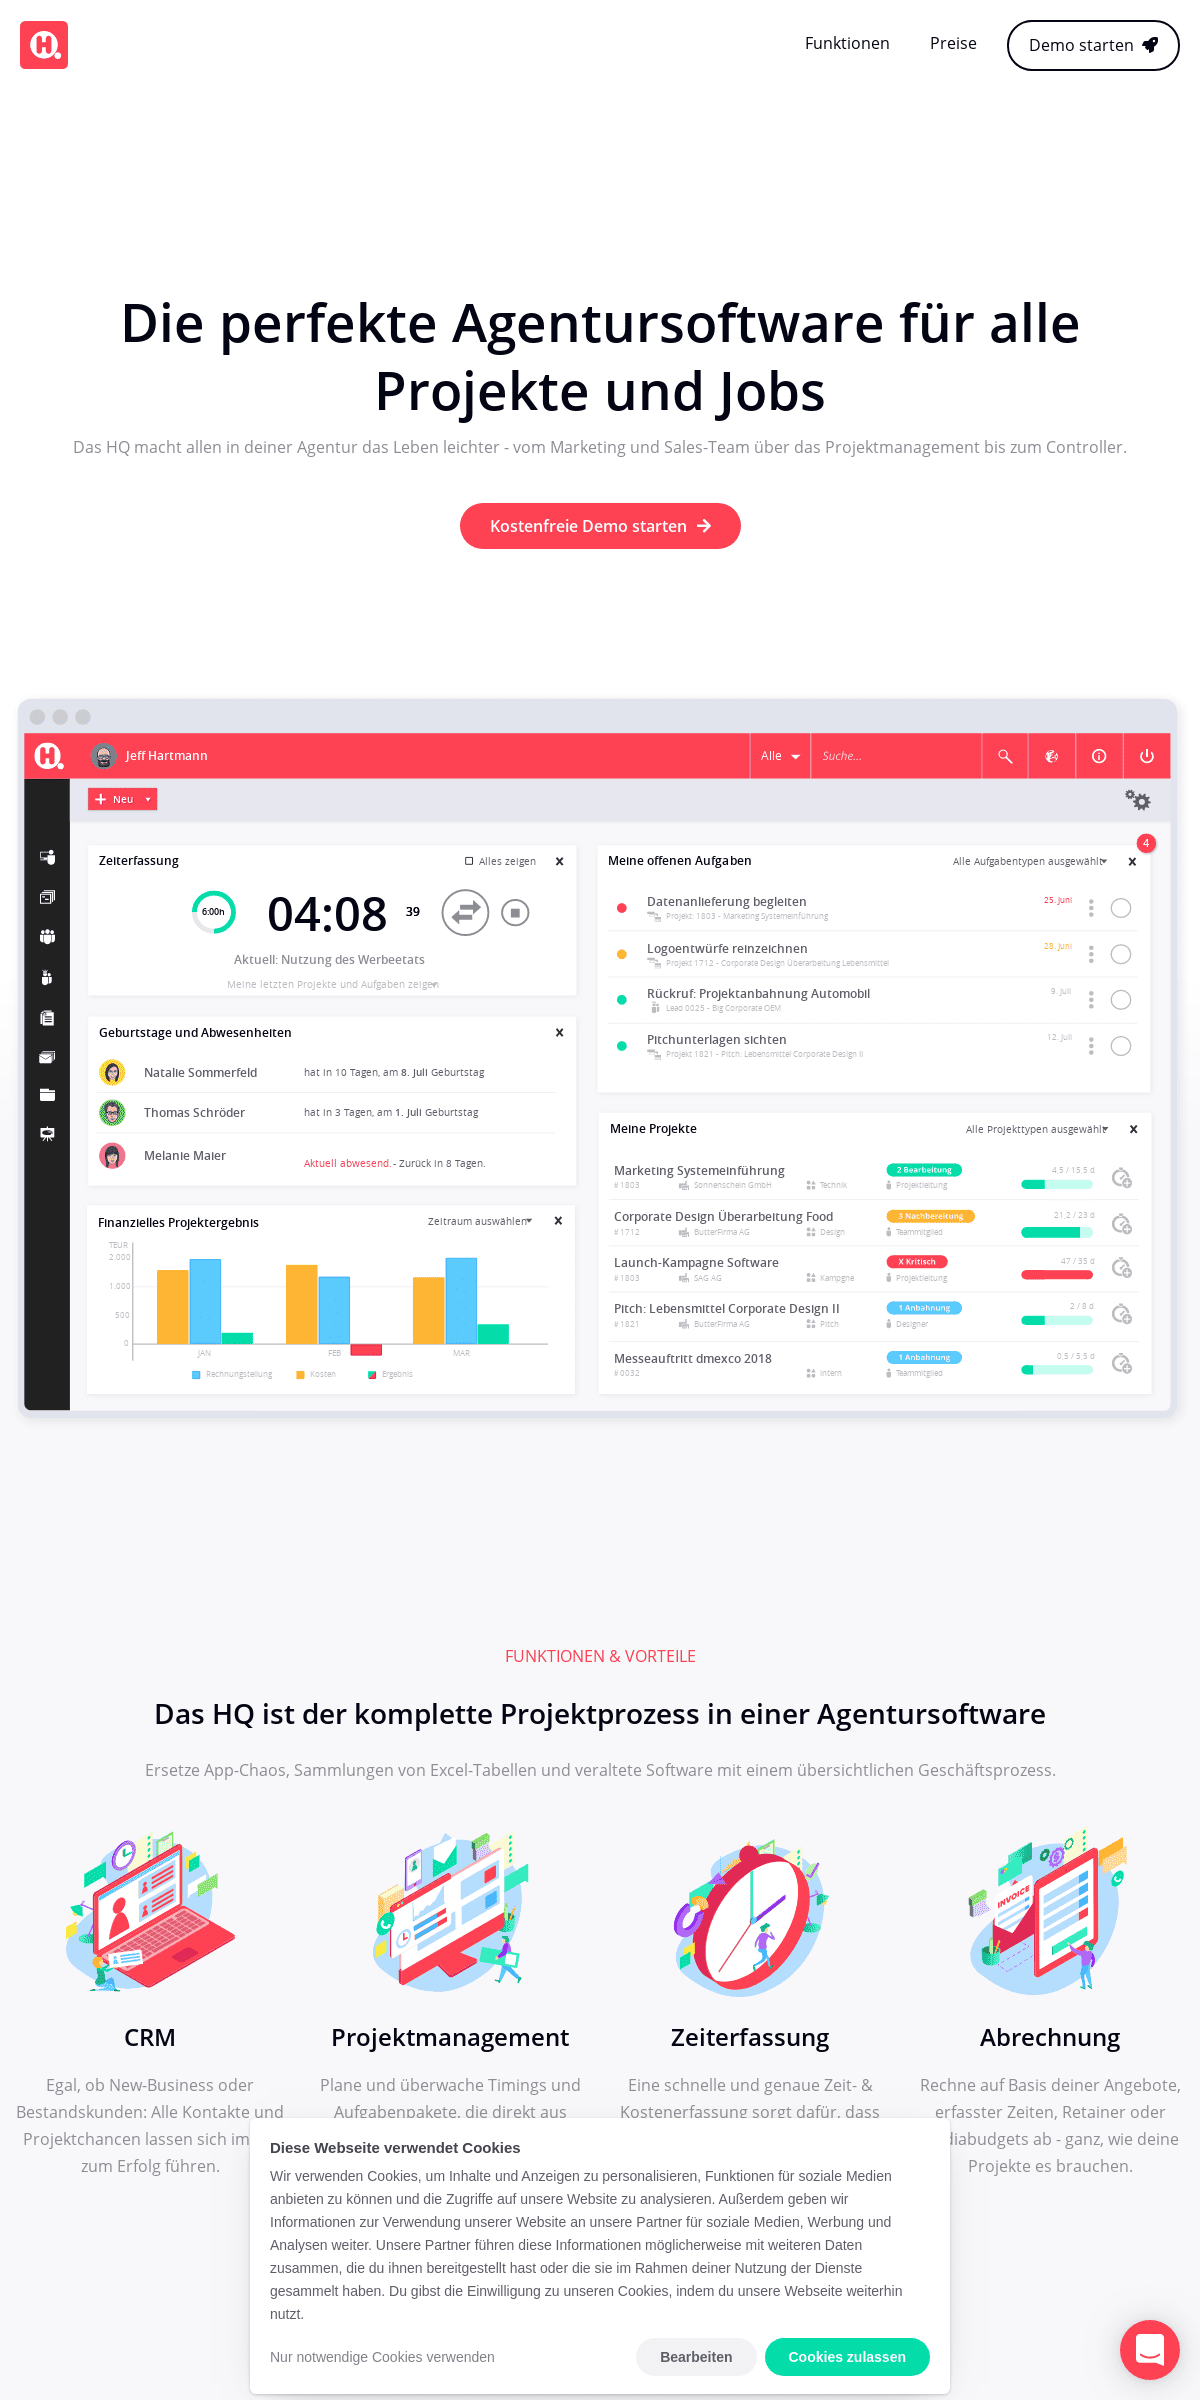 A complete backup of hqlabs.de